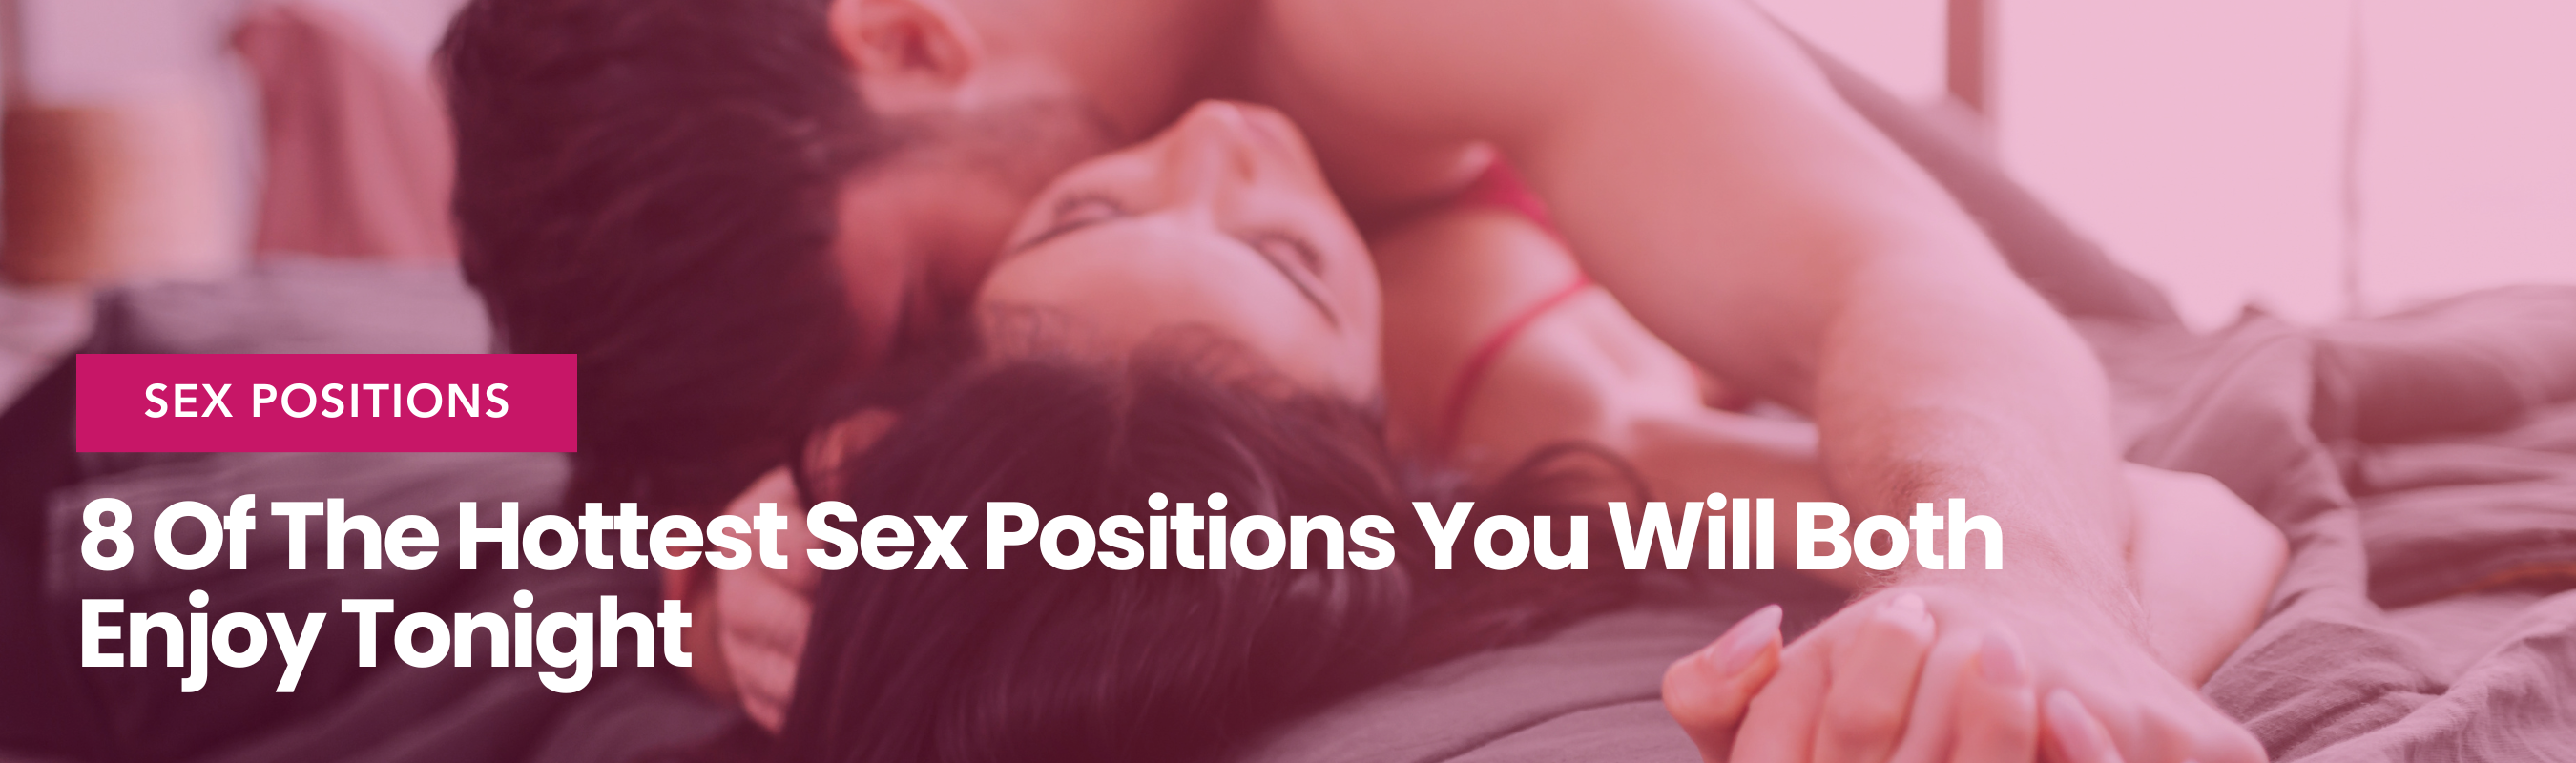 8 Of The Hottest Sex Positions You Will Both Enjoy Tonight